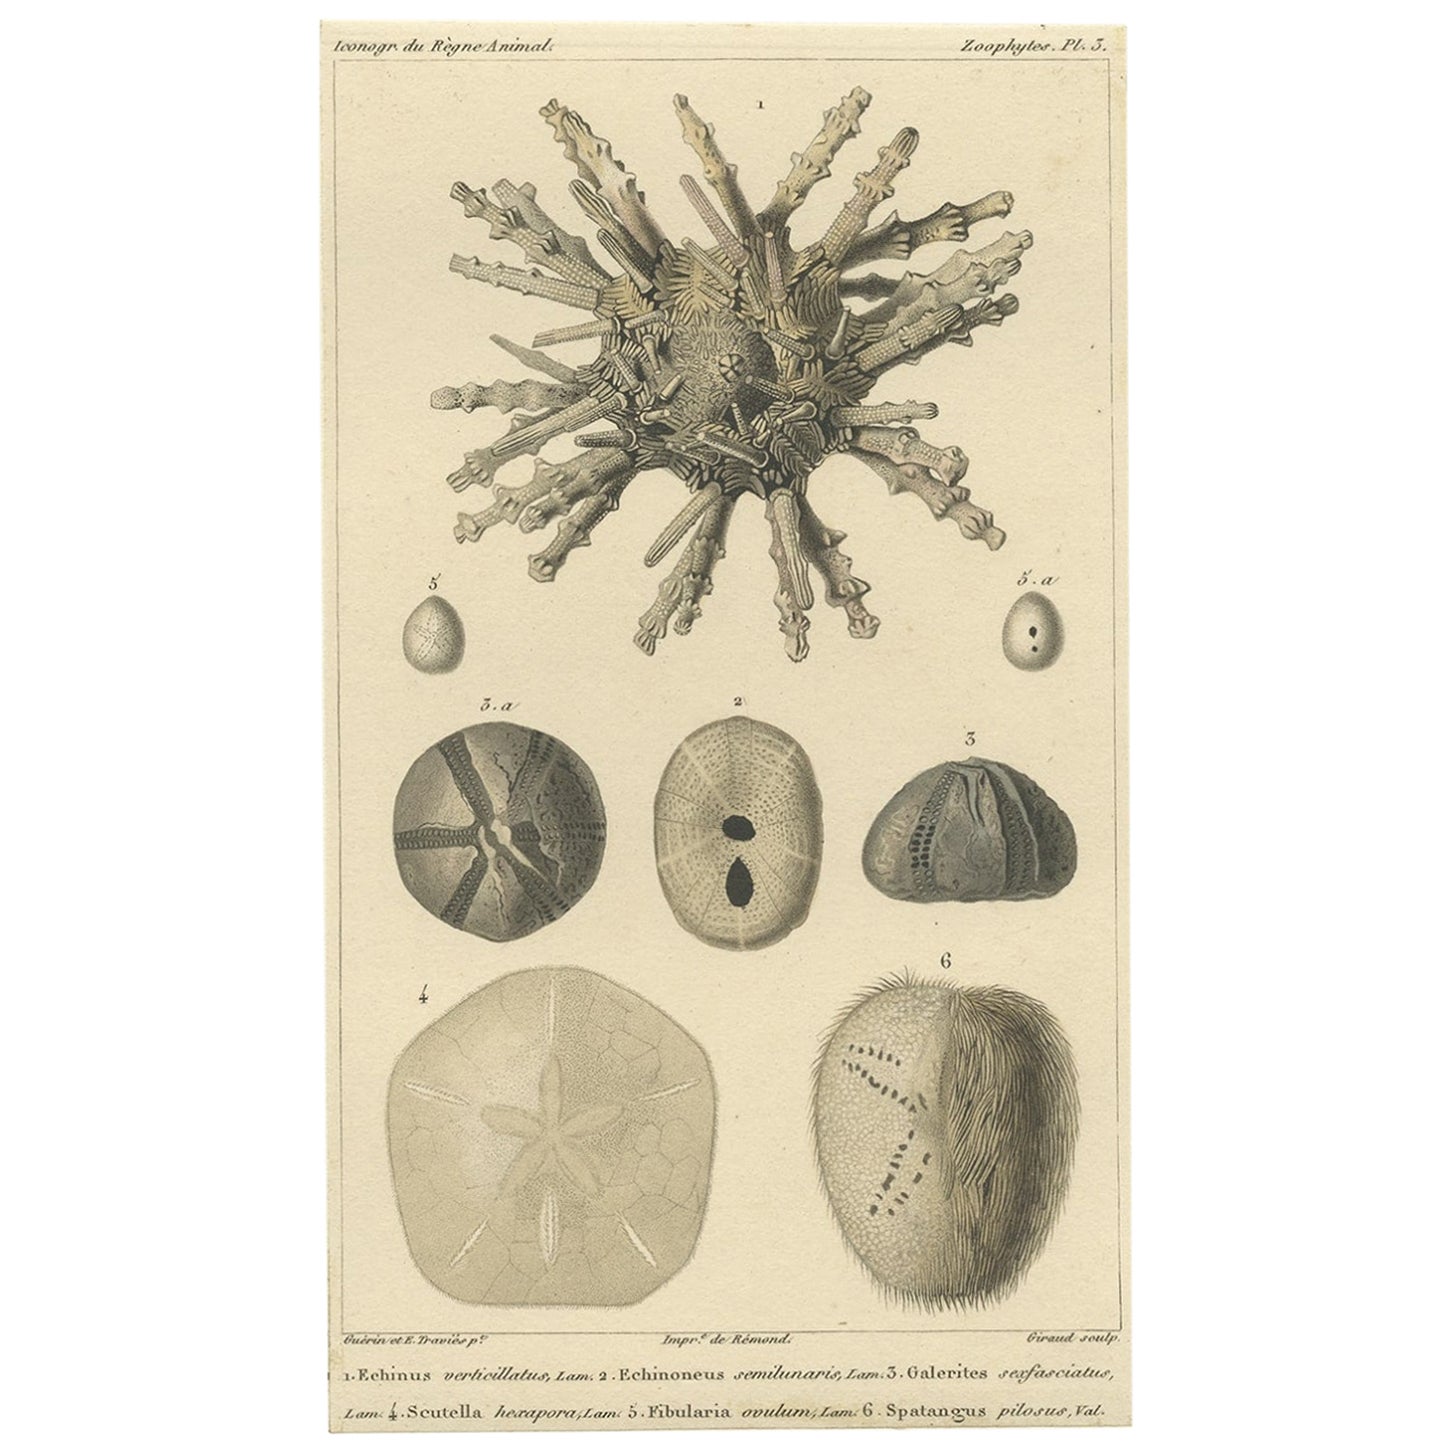 Old Print of the Sand Dollar and Other Sea Urchins, um 1830